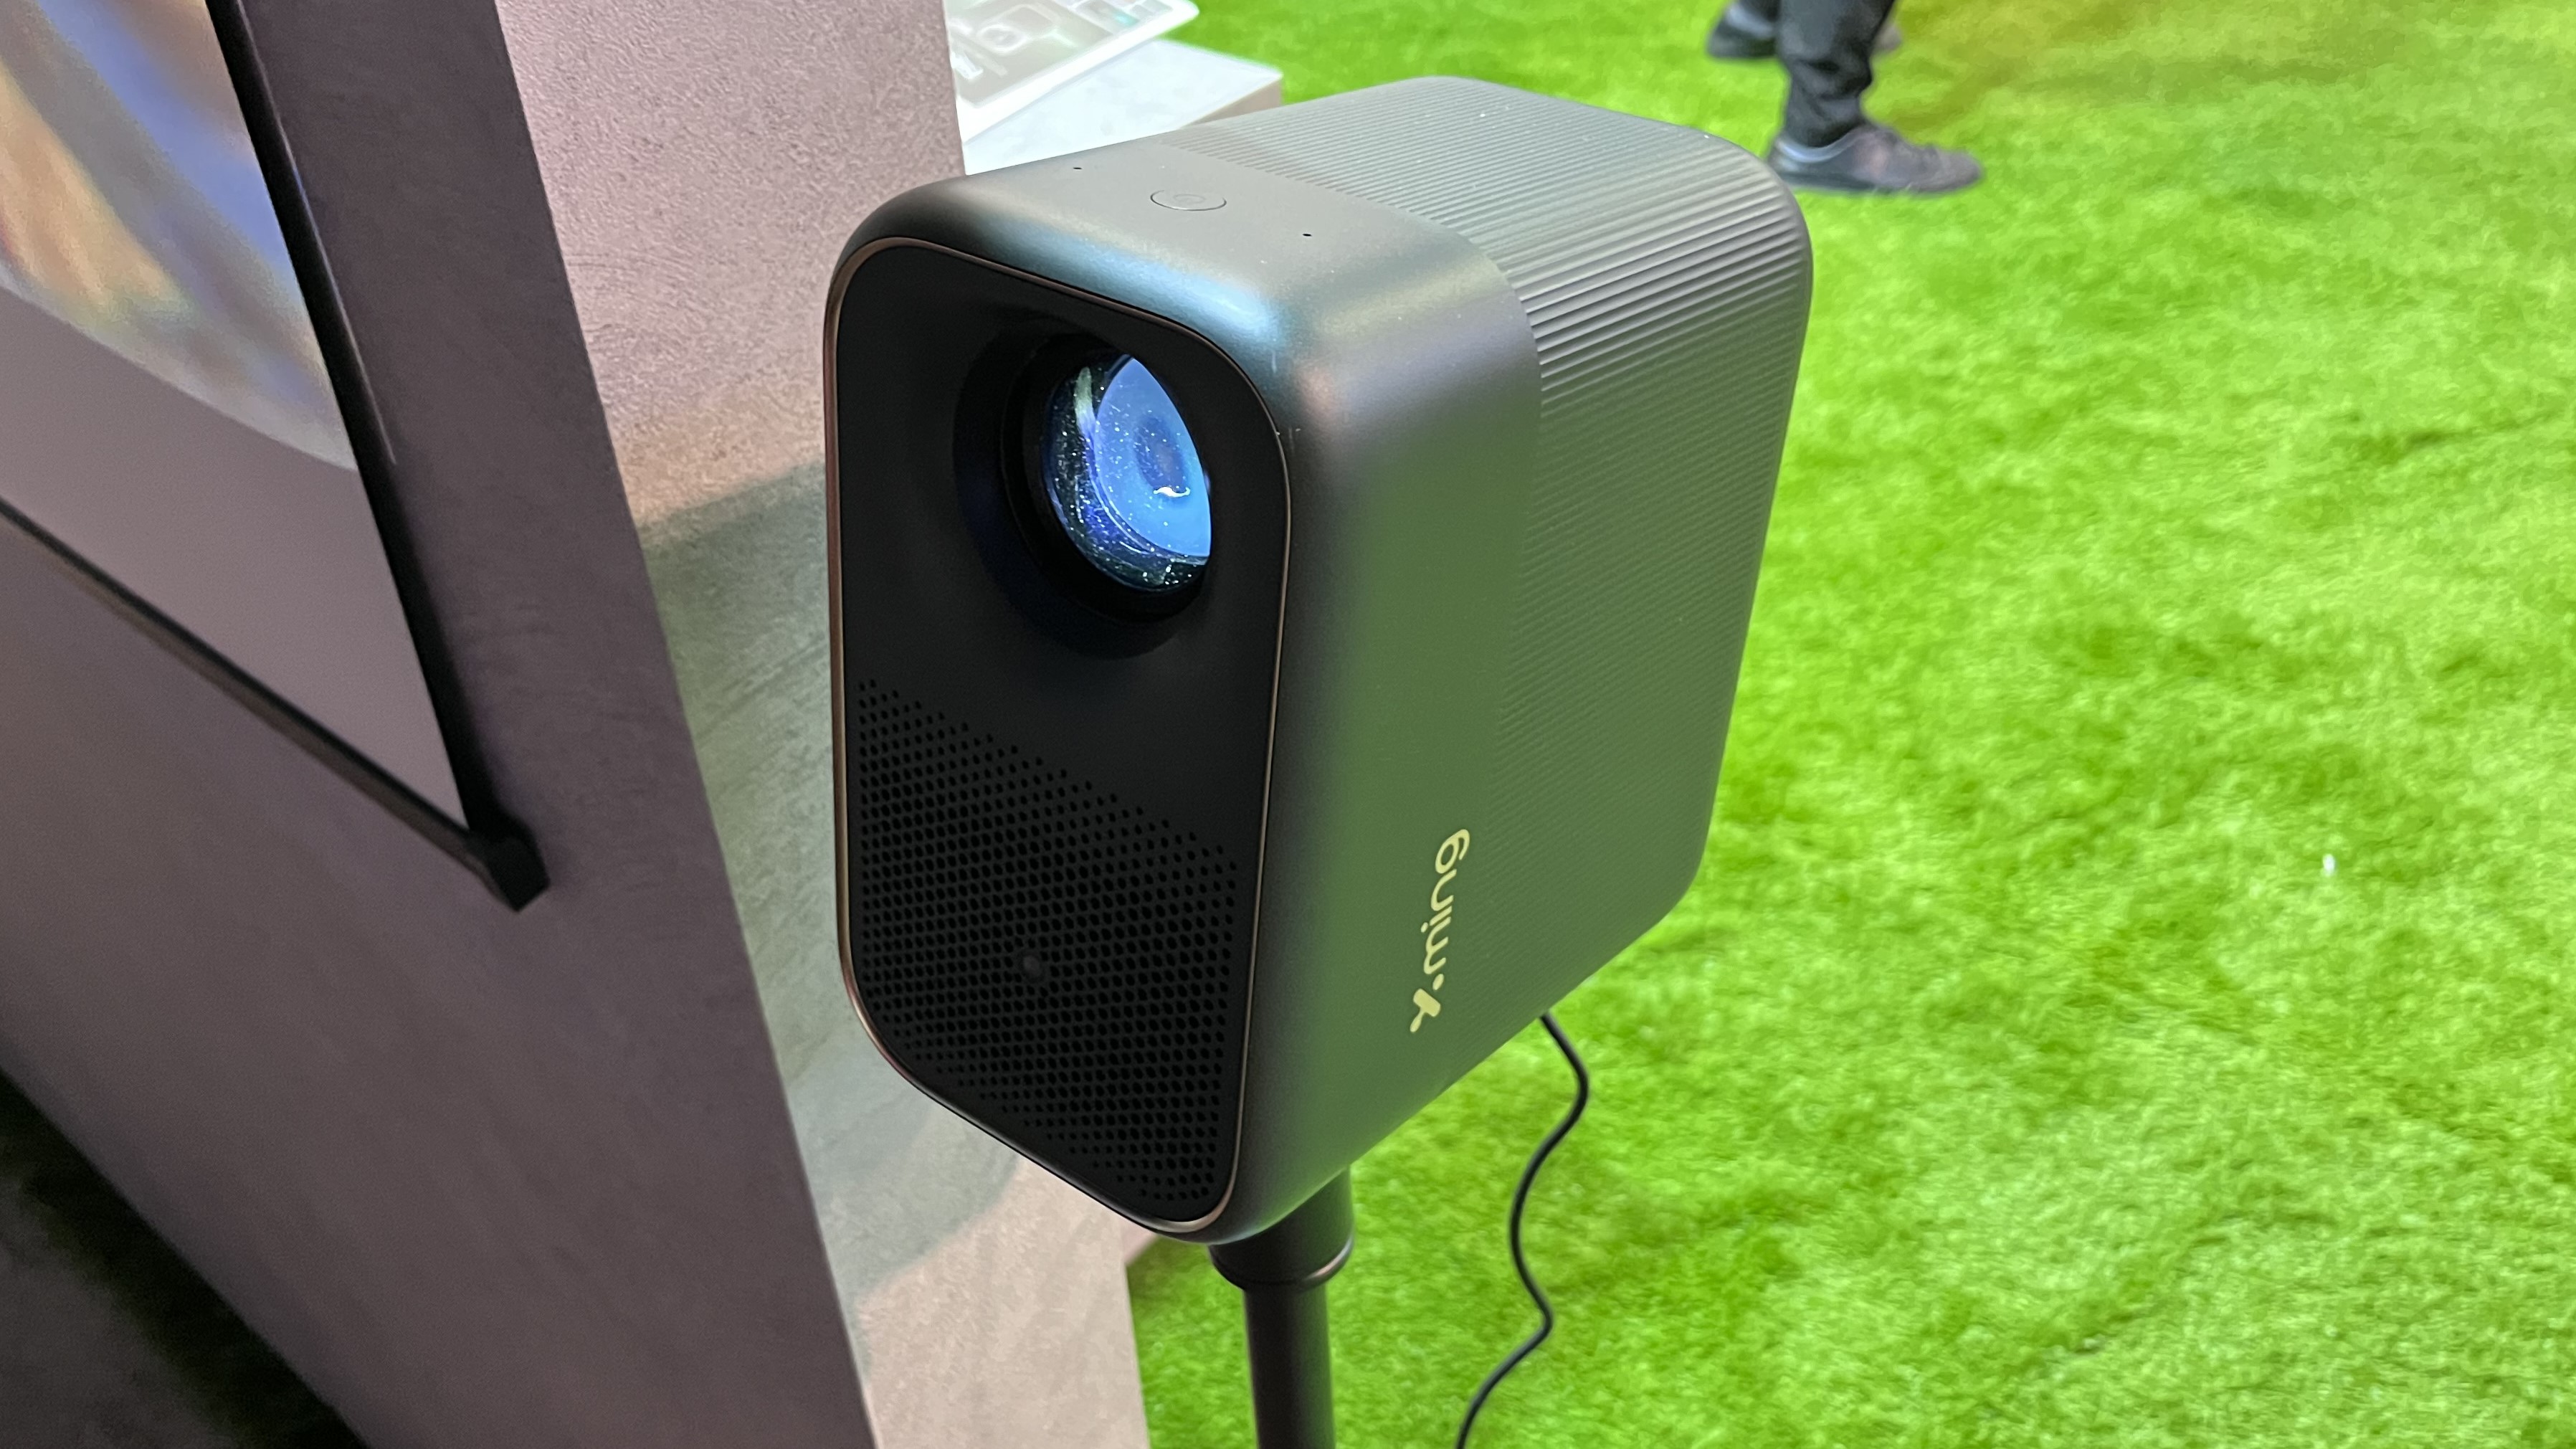 Xming Page One portable projector debuts at CES